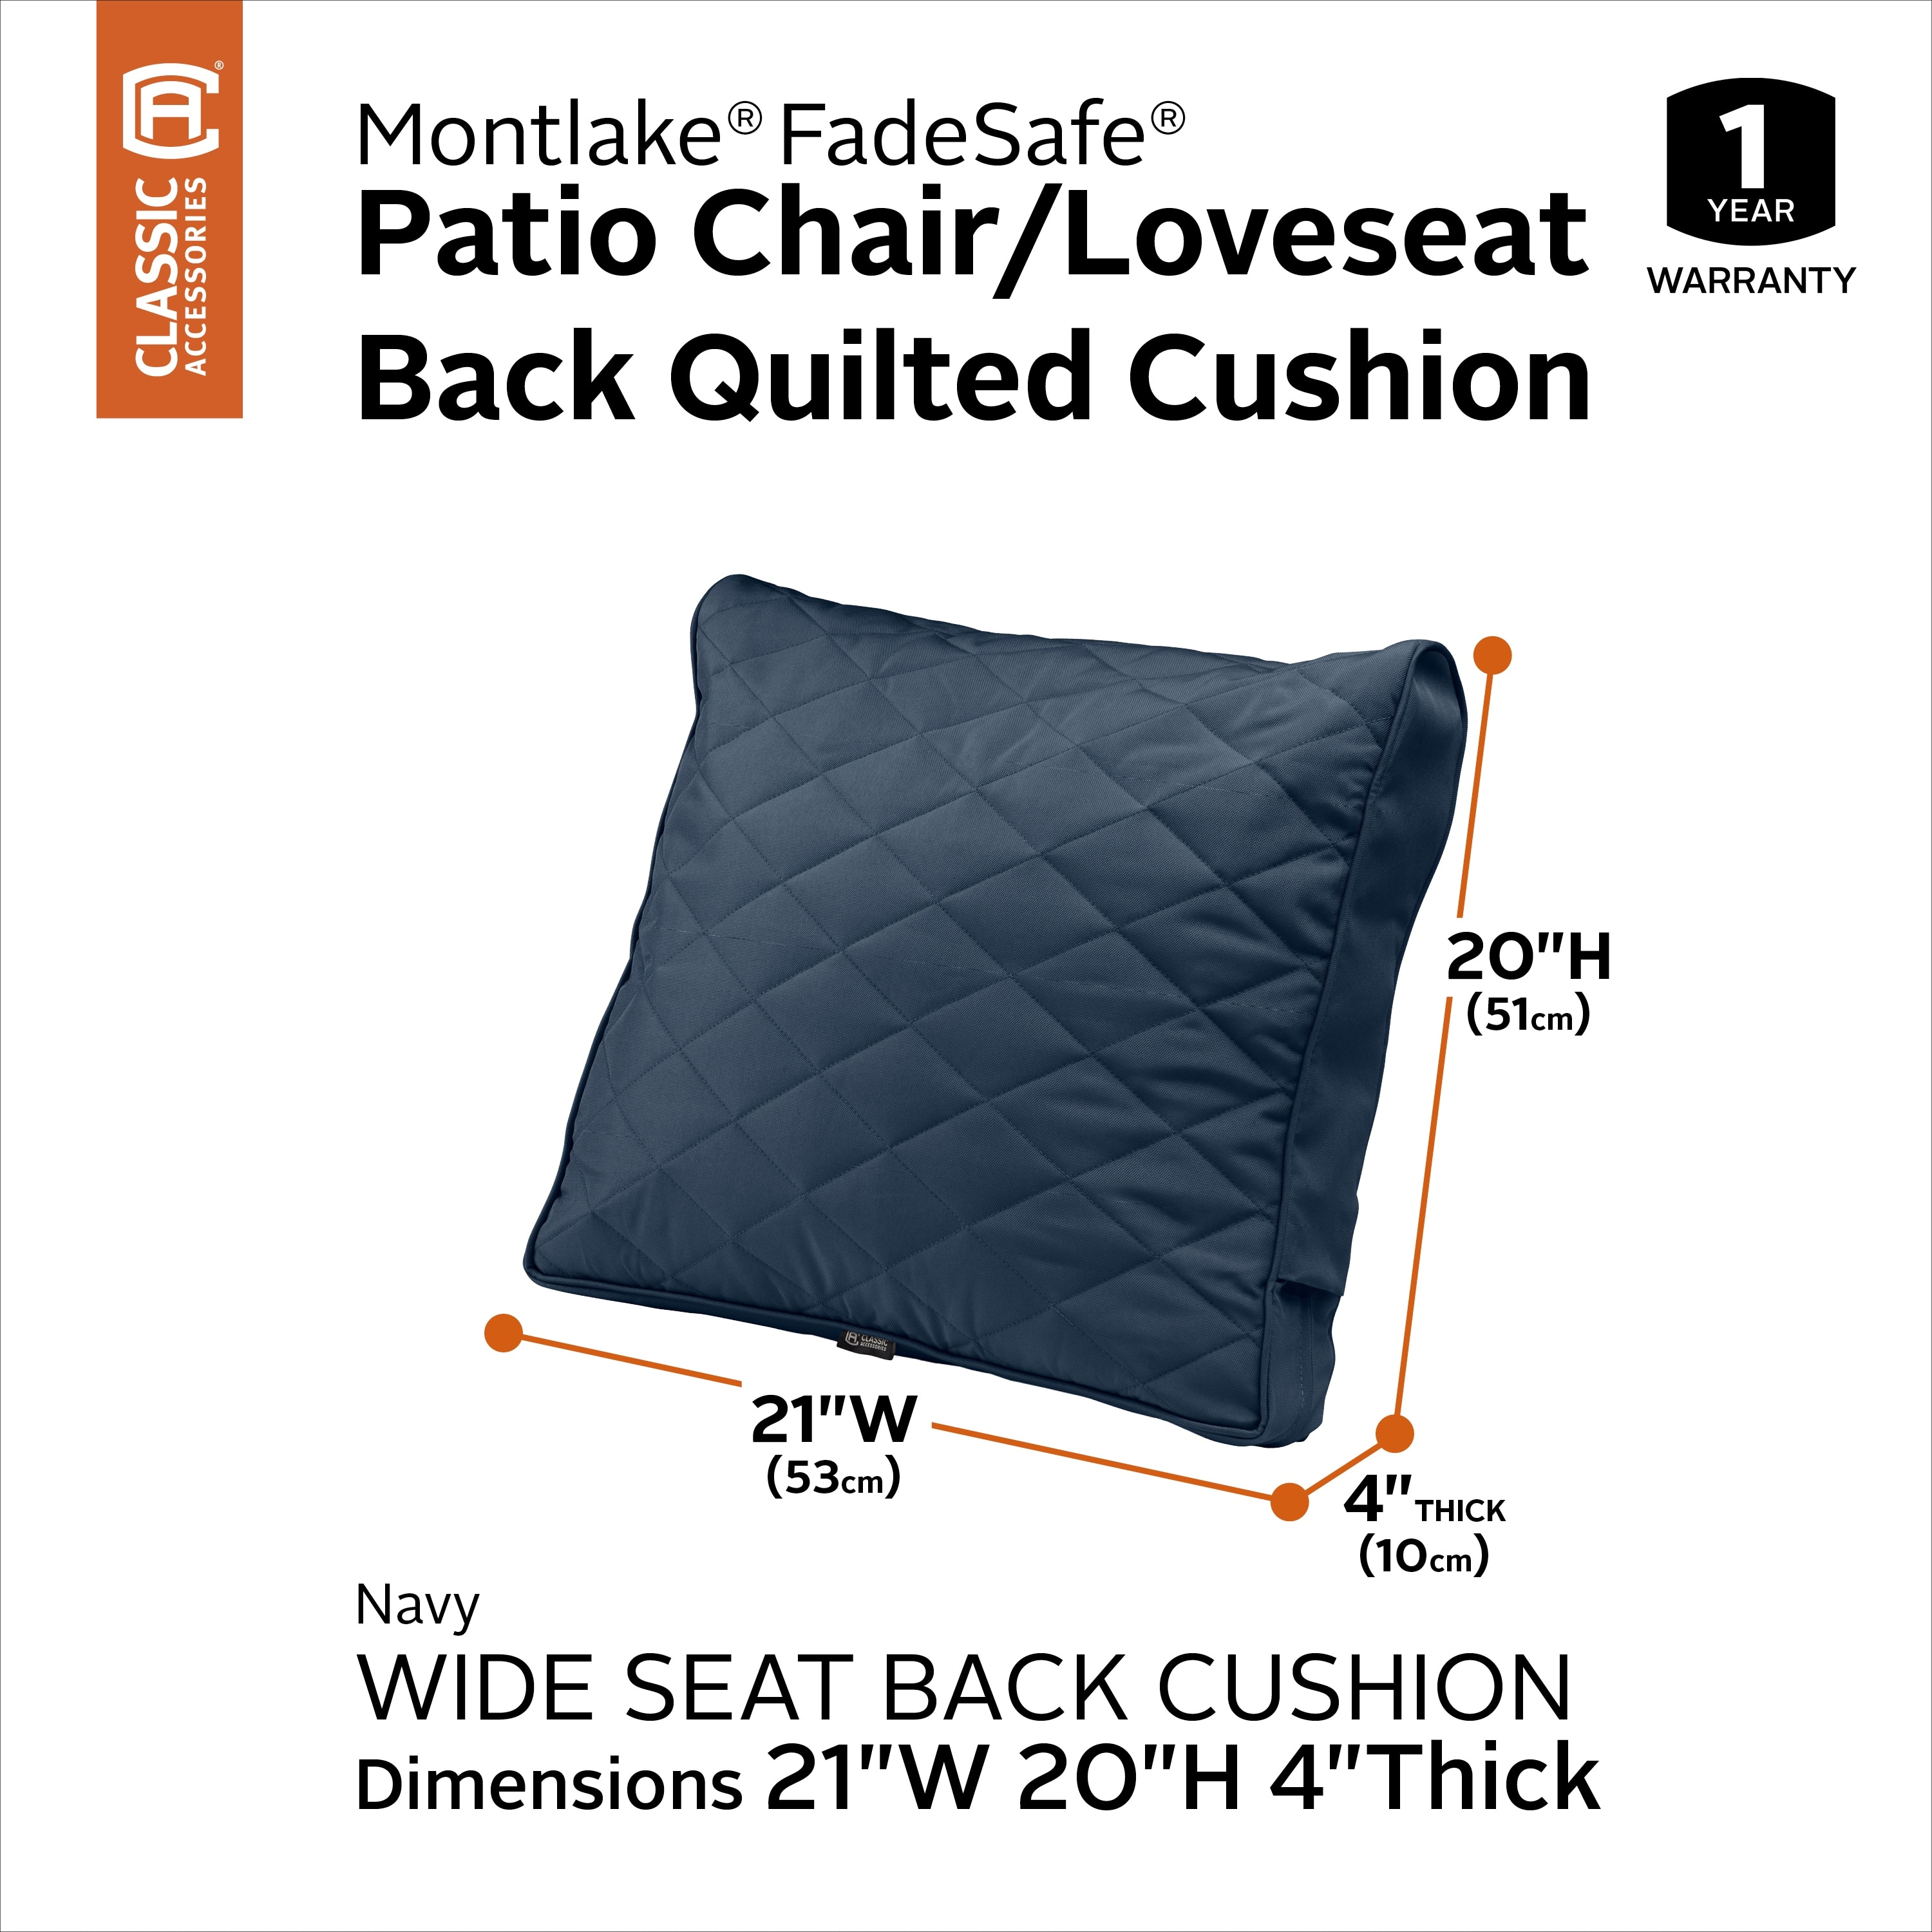 Classic Accessories Montlake FadeSafe Patio Chair/Loveseat Back Quilted Cushion